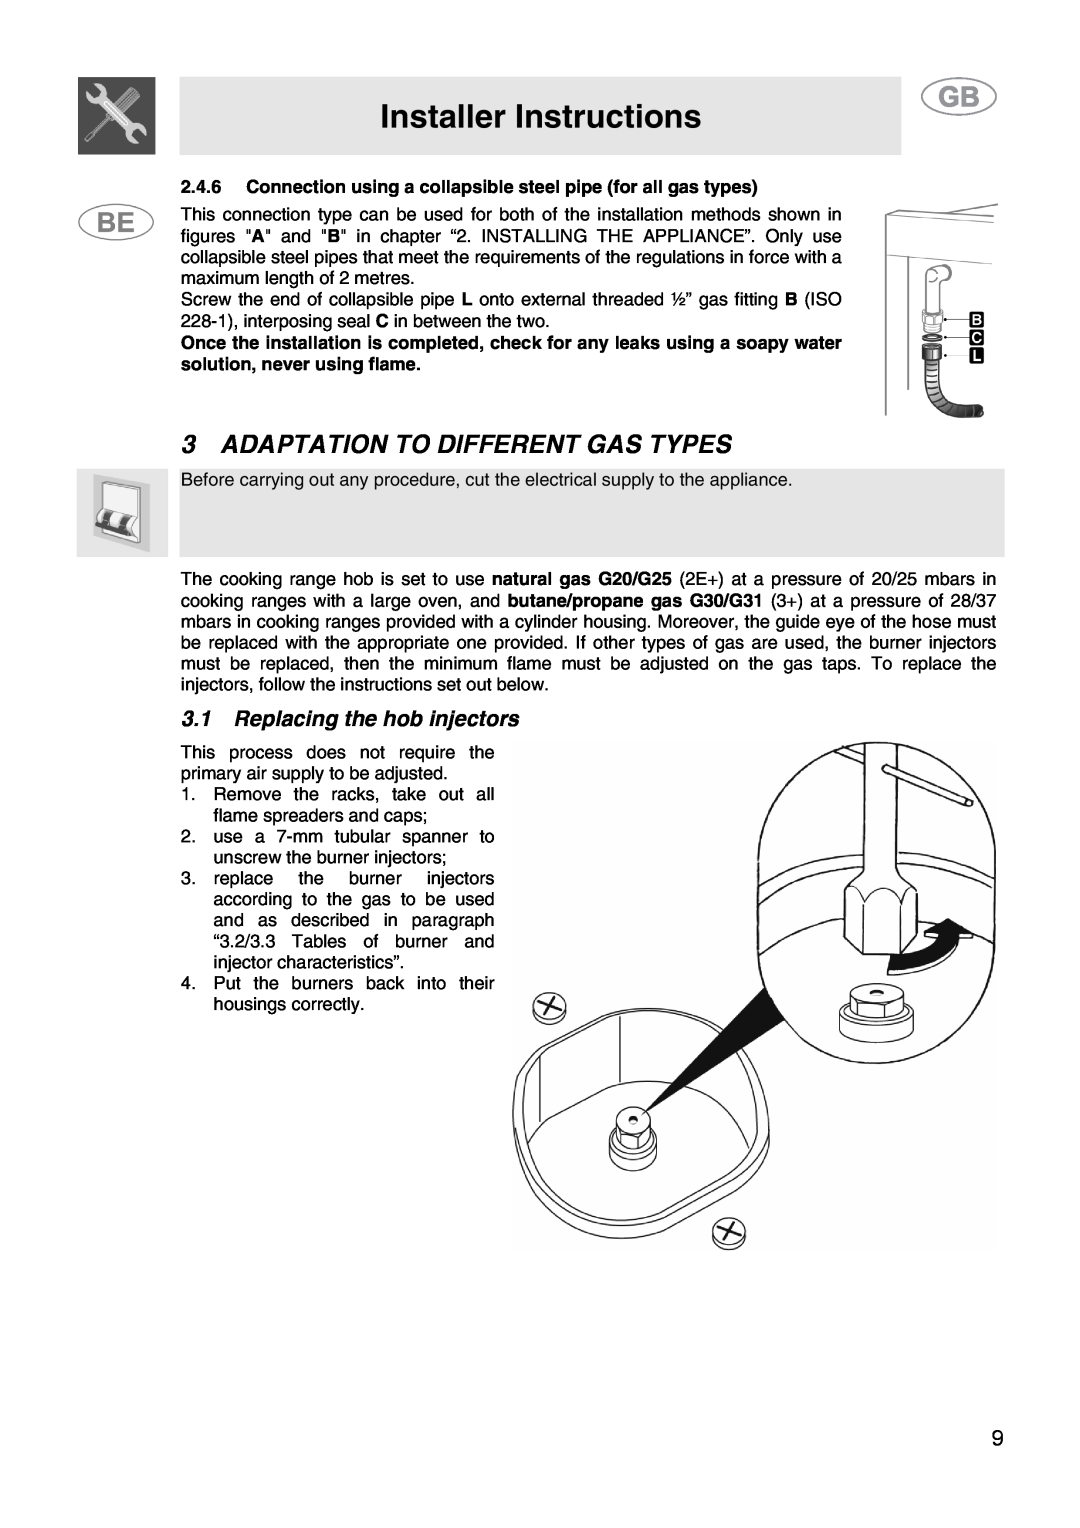 Smeg CS15-5 manual Adaptation To Different Gas Types, 3.1Replacing the hob injectors, Installer Instructions 